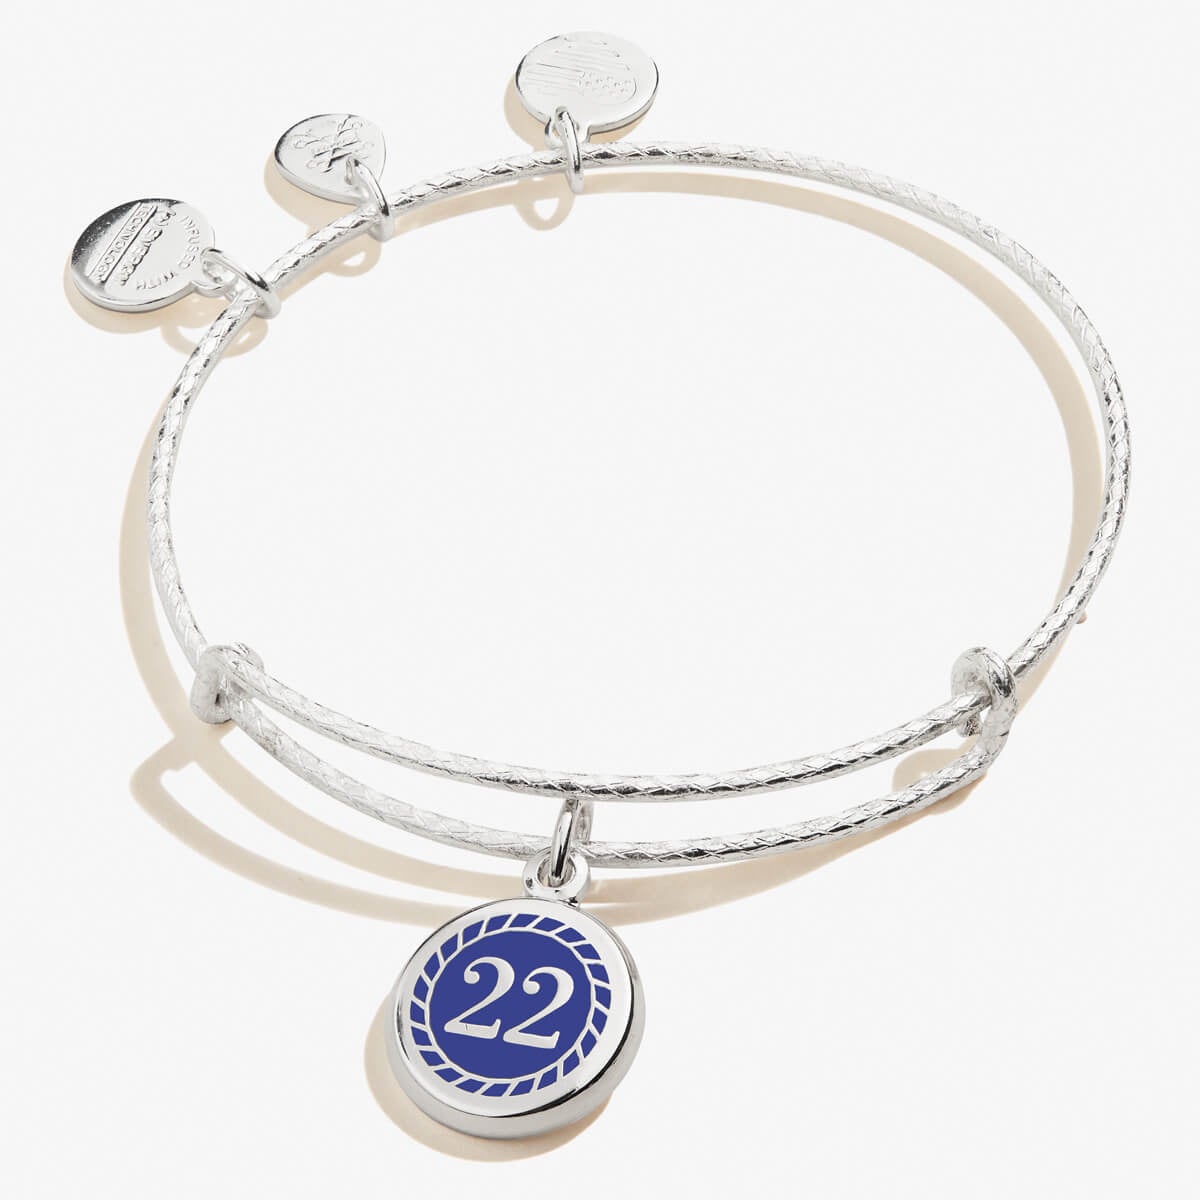 Details about   ALEX and ANI~ PEACE~Silver Navy Charm Bangle Bracelets ~SET OF 2~ NWT CARD $68